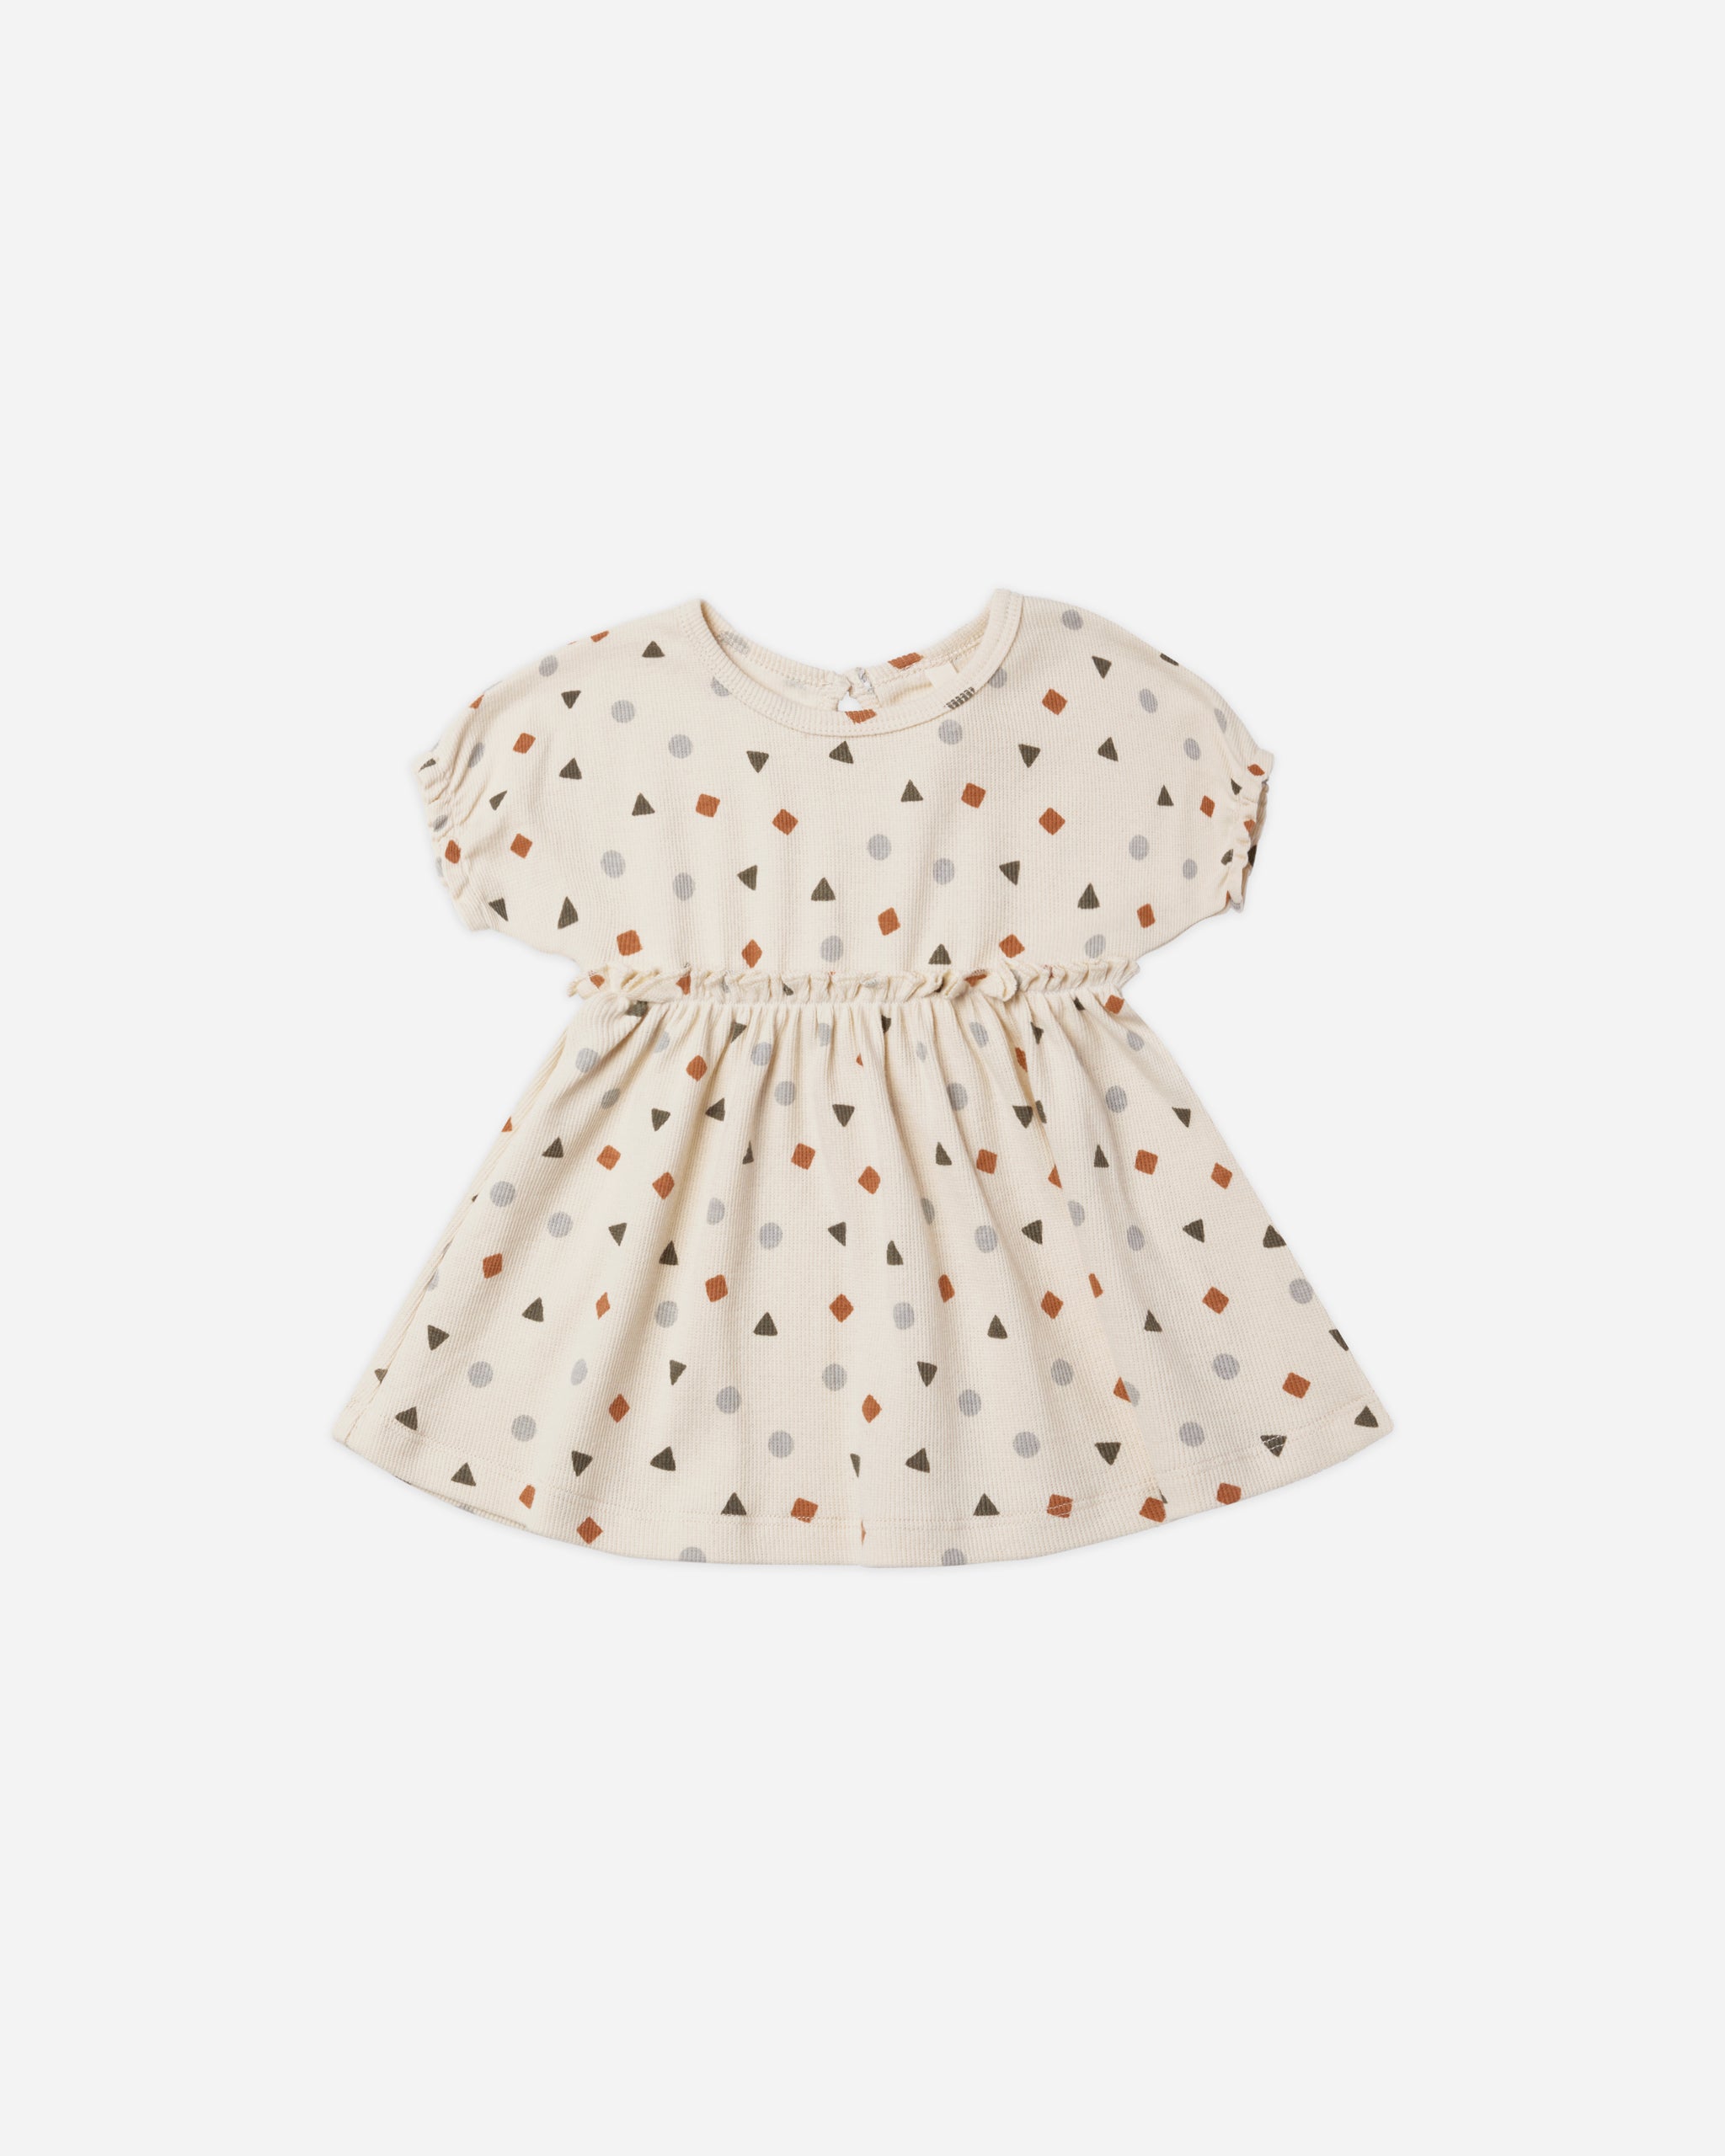 Annie Dress || Geo - Rylee + Cru | Kids Clothes | Trendy Baby Clothes | Modern Infant Outfits |